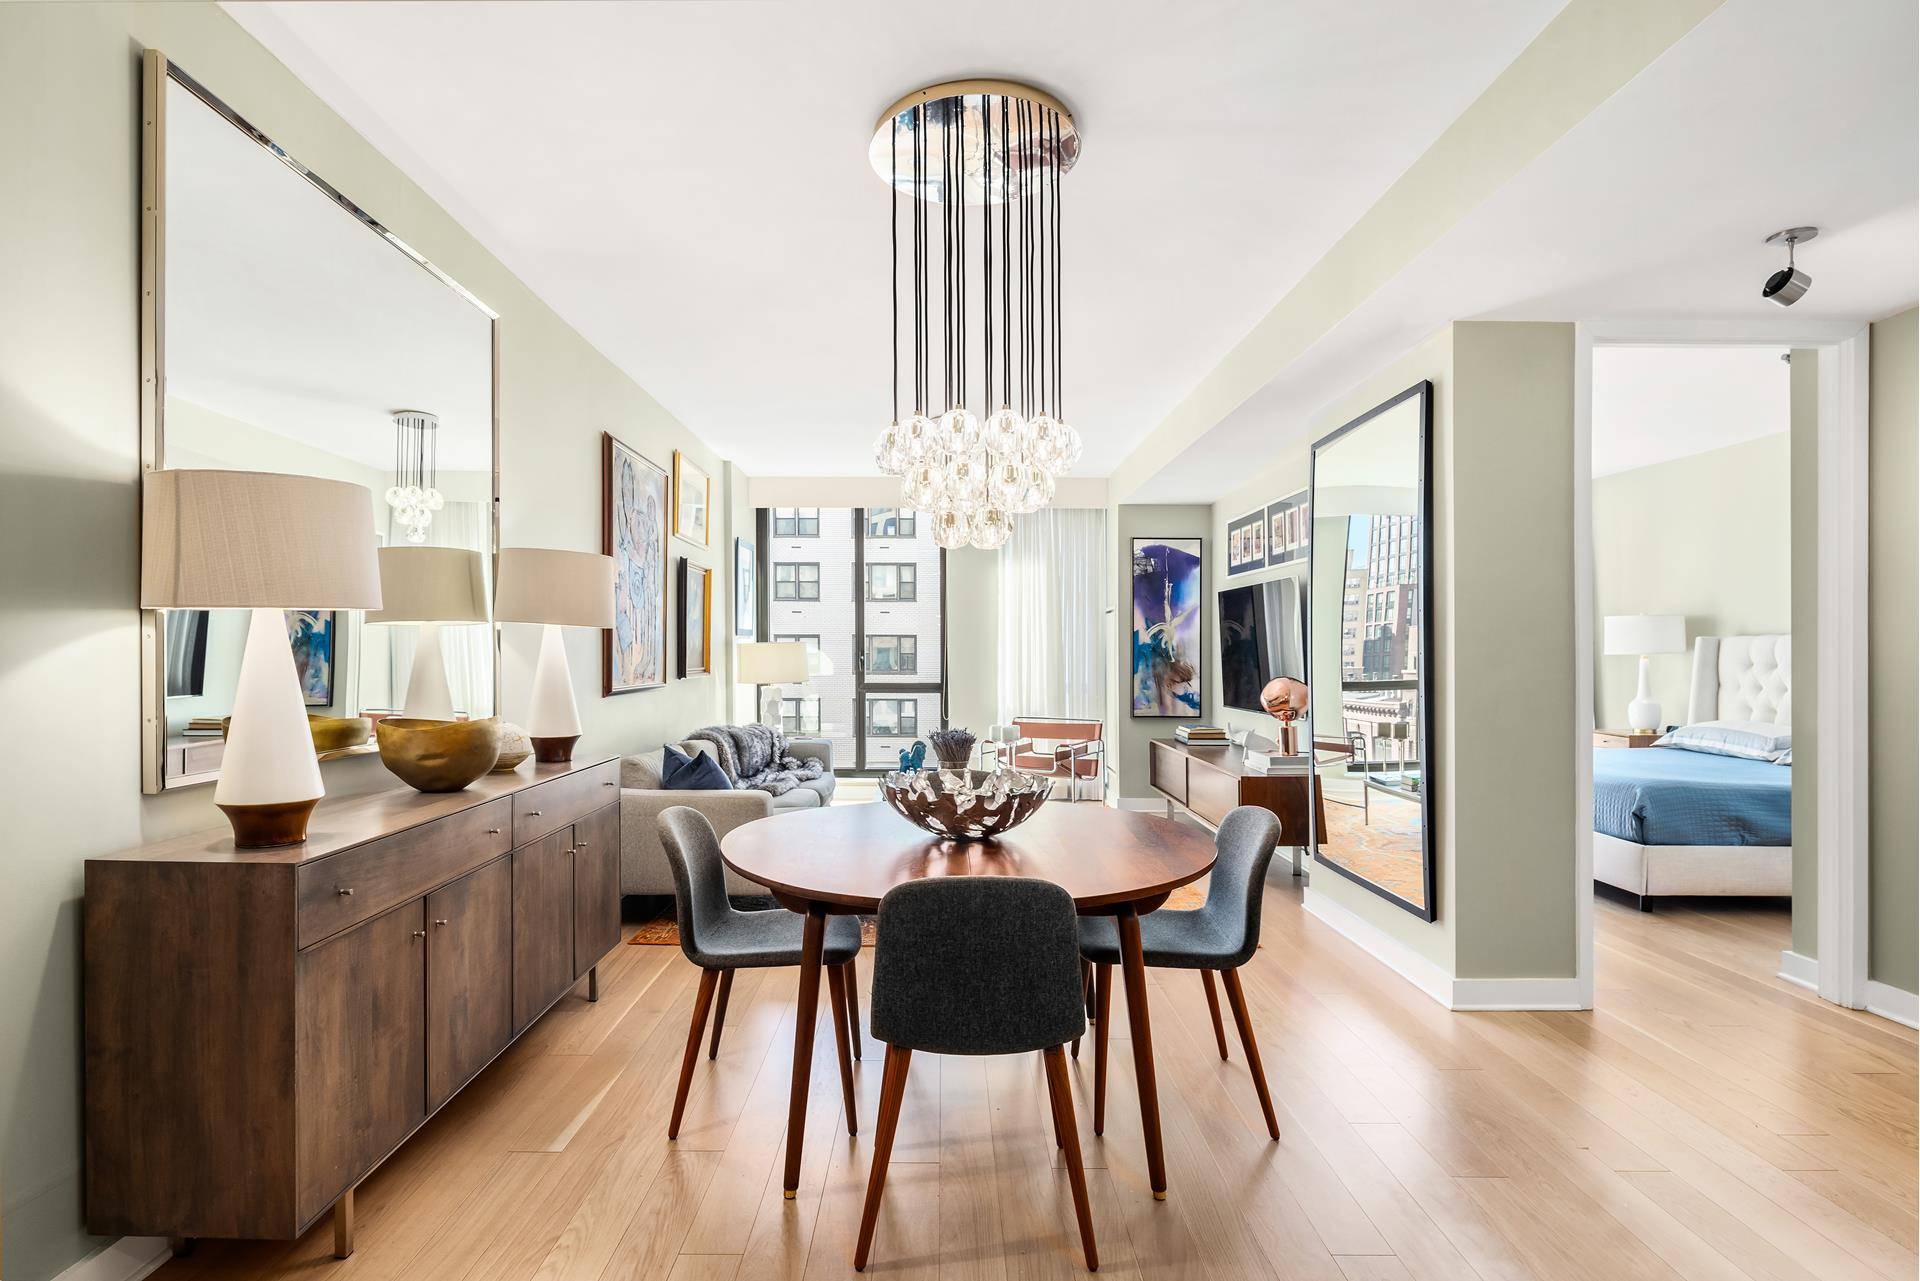 No detail has been overlooked in this uniquely designed, high floor 833 square foot one bedroom home with amazing light and custom elements at the luxurious 160 East 22nd Street ...